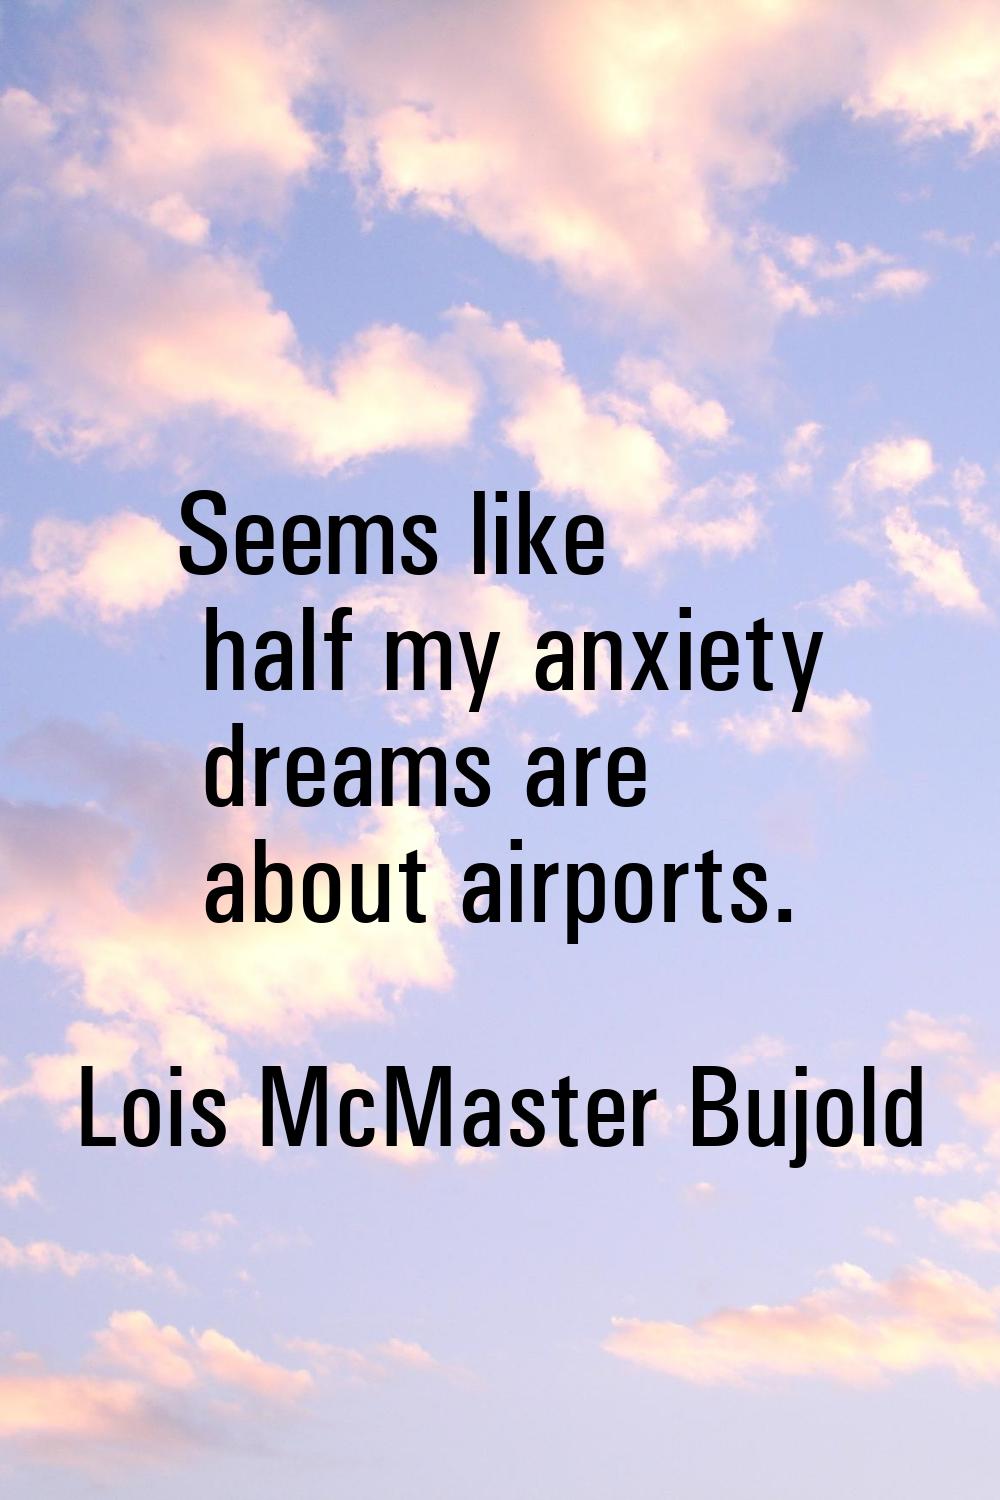 Seems like half my anxiety dreams are about airports.